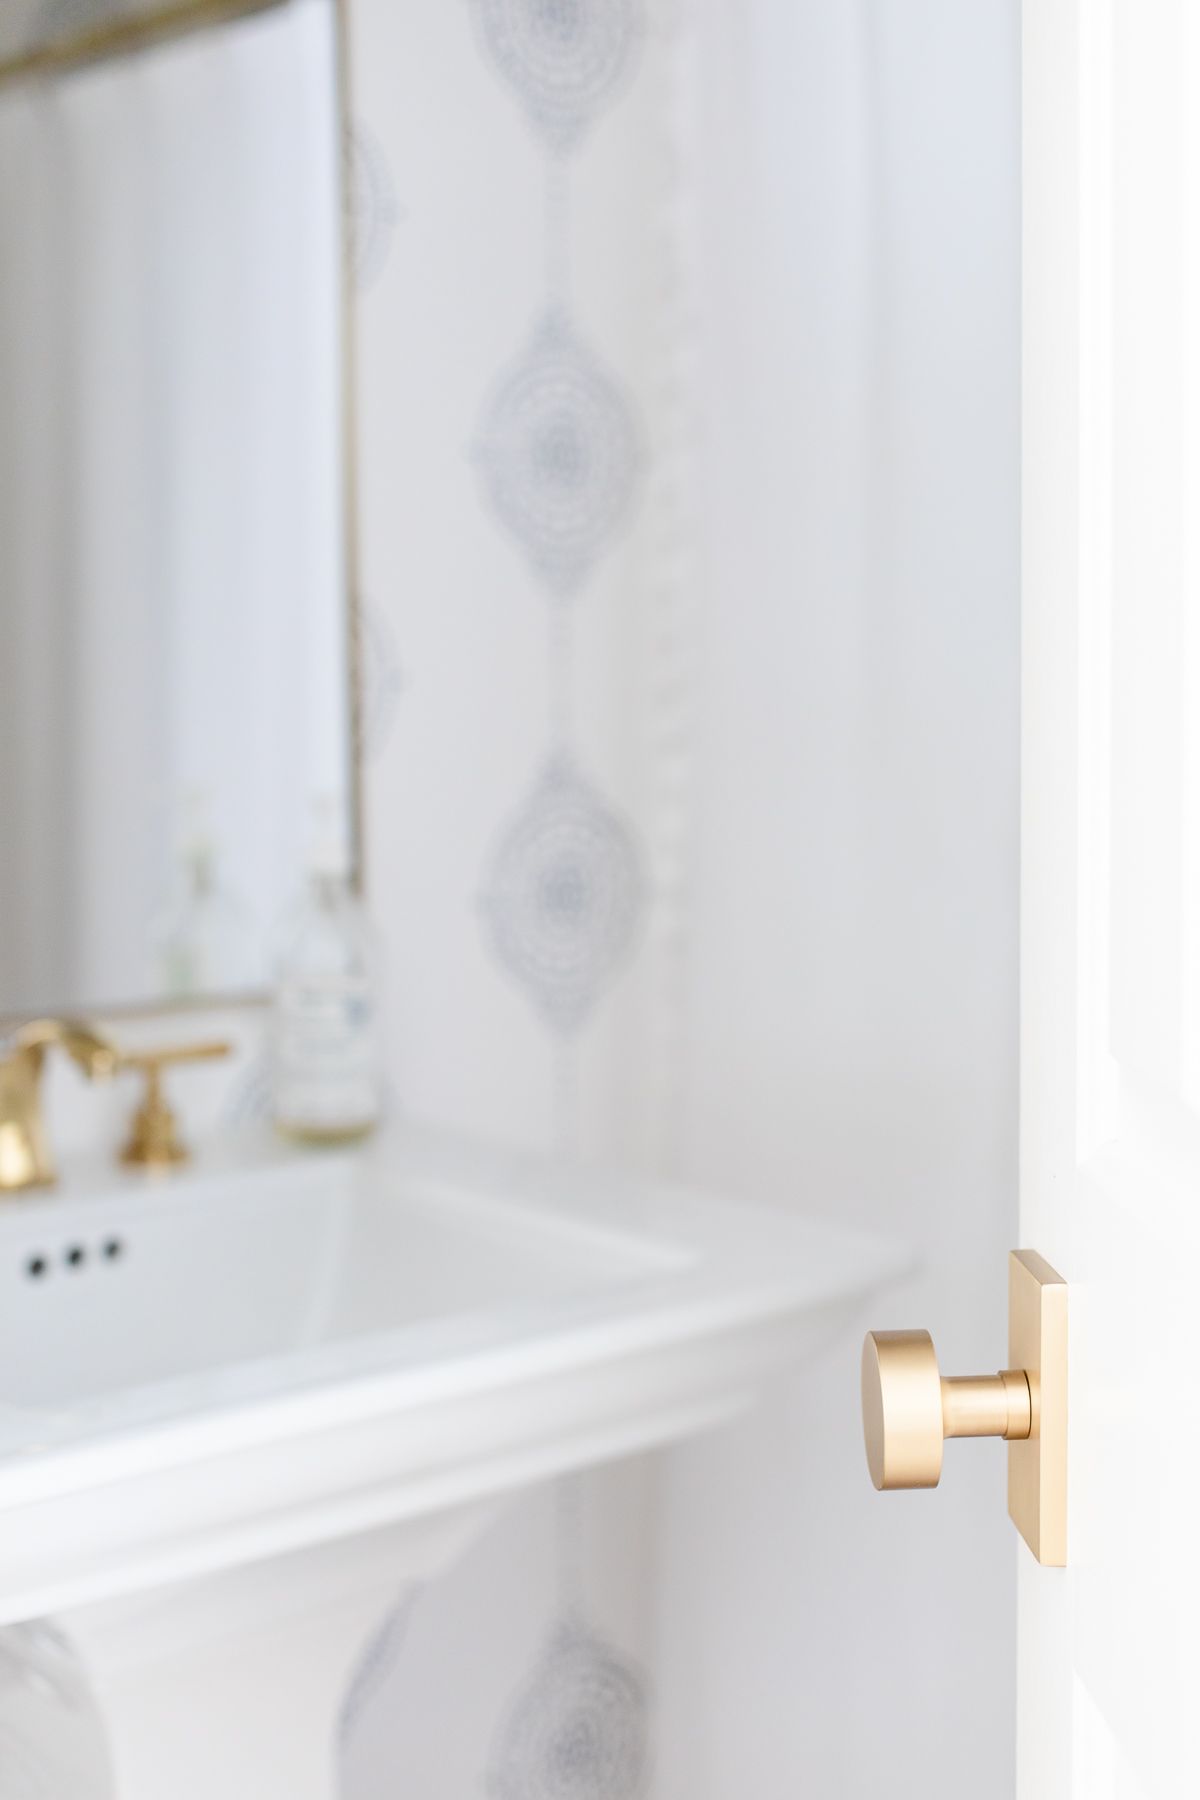 A bathroom with a white pedestal sink, blue and white striped bathroom, and a brass door knob for a house update